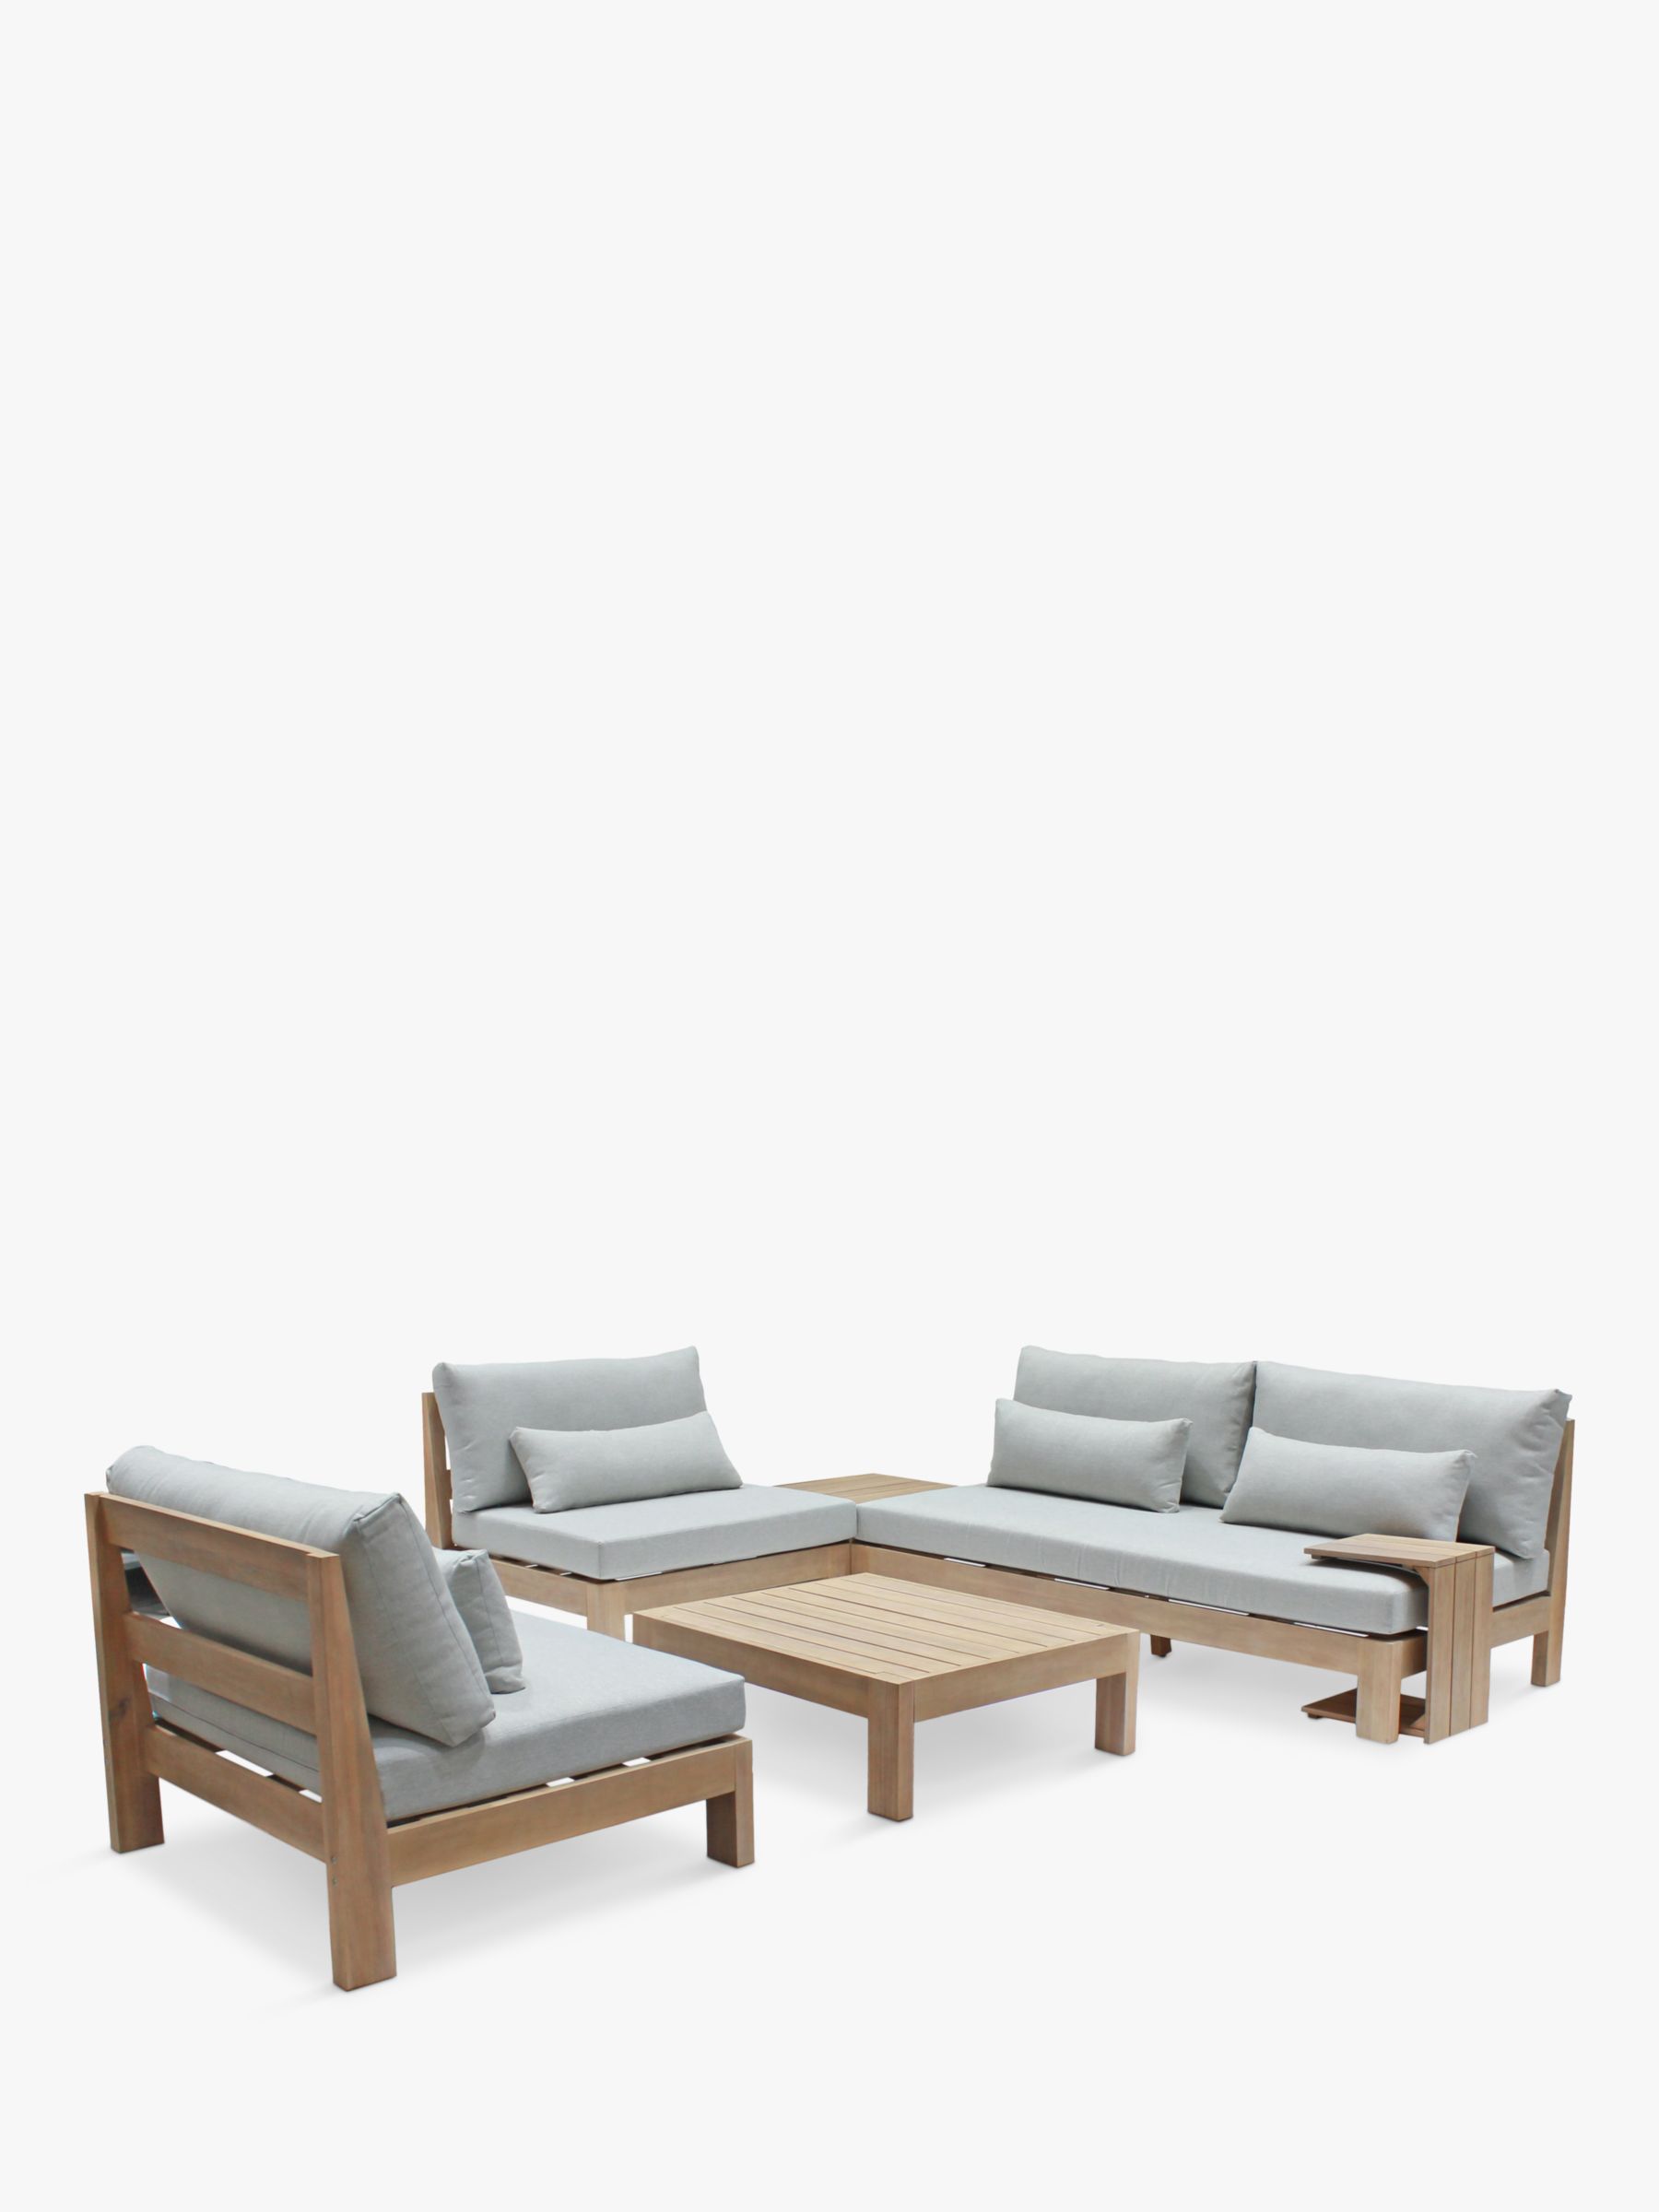 Photo of Kettler beach 4-seat garden low lounging table & chairs set fsc-certified -acacia wood- natural